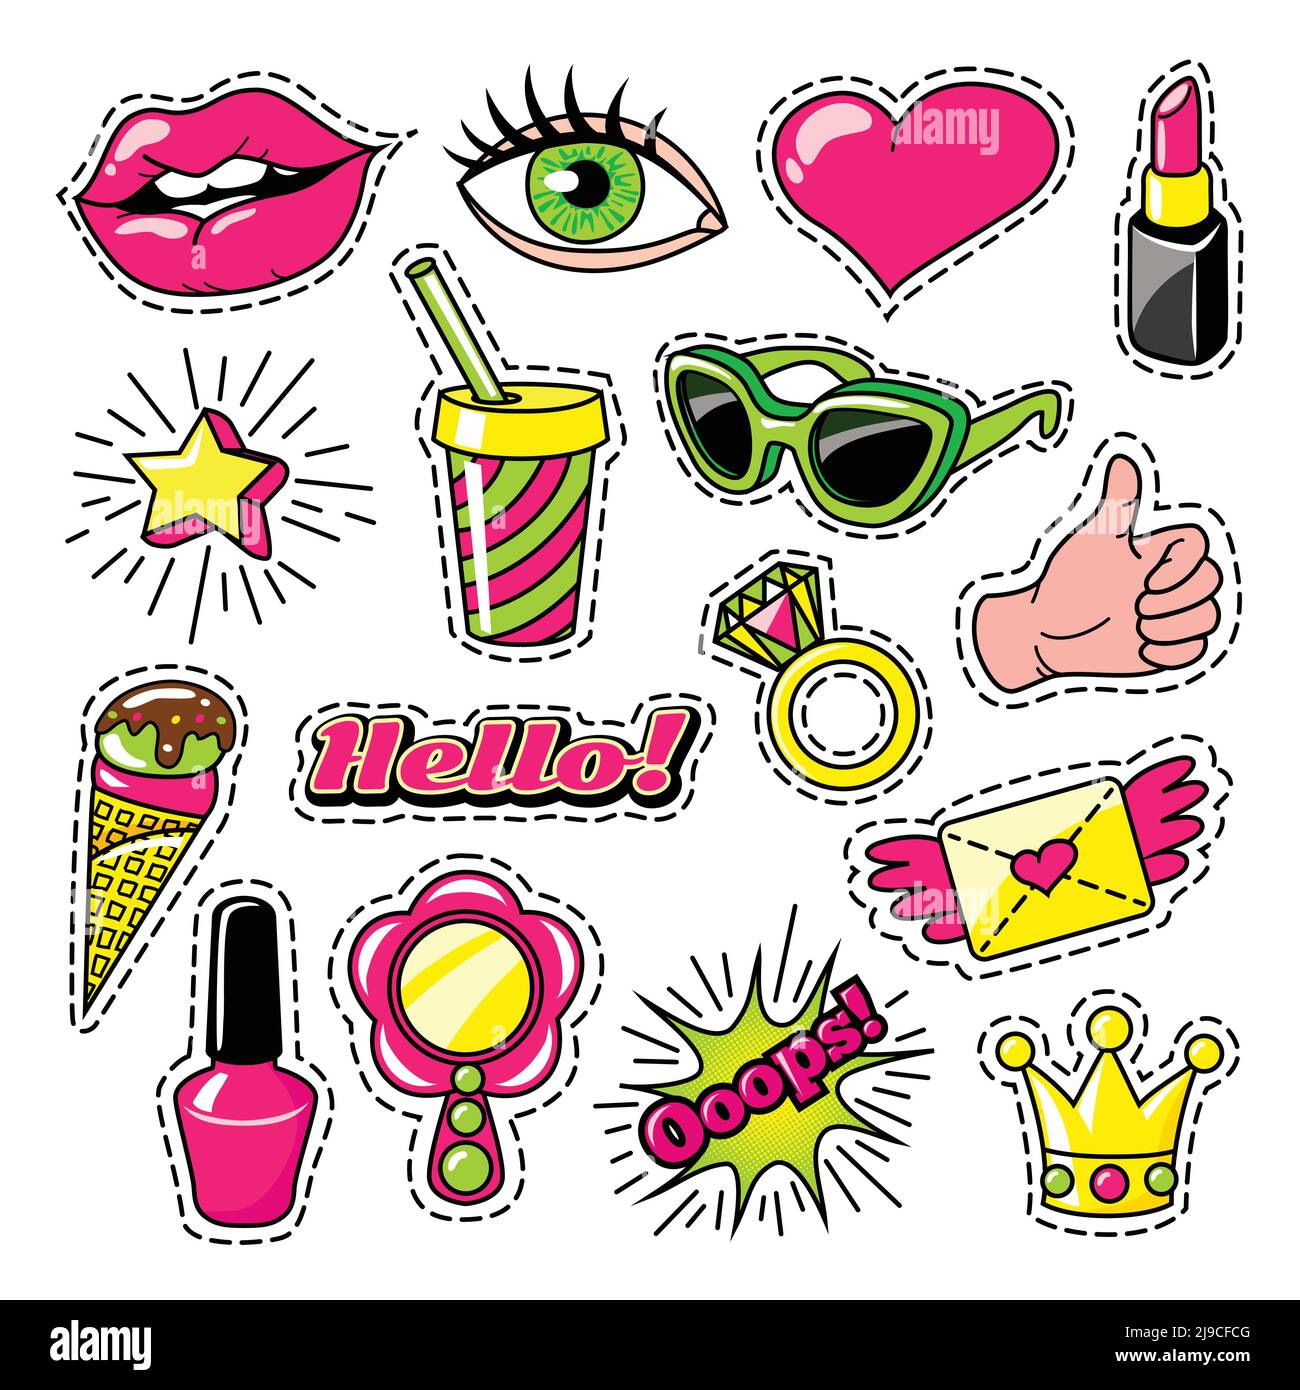 Oops girl Stock Vector Images - Alamy